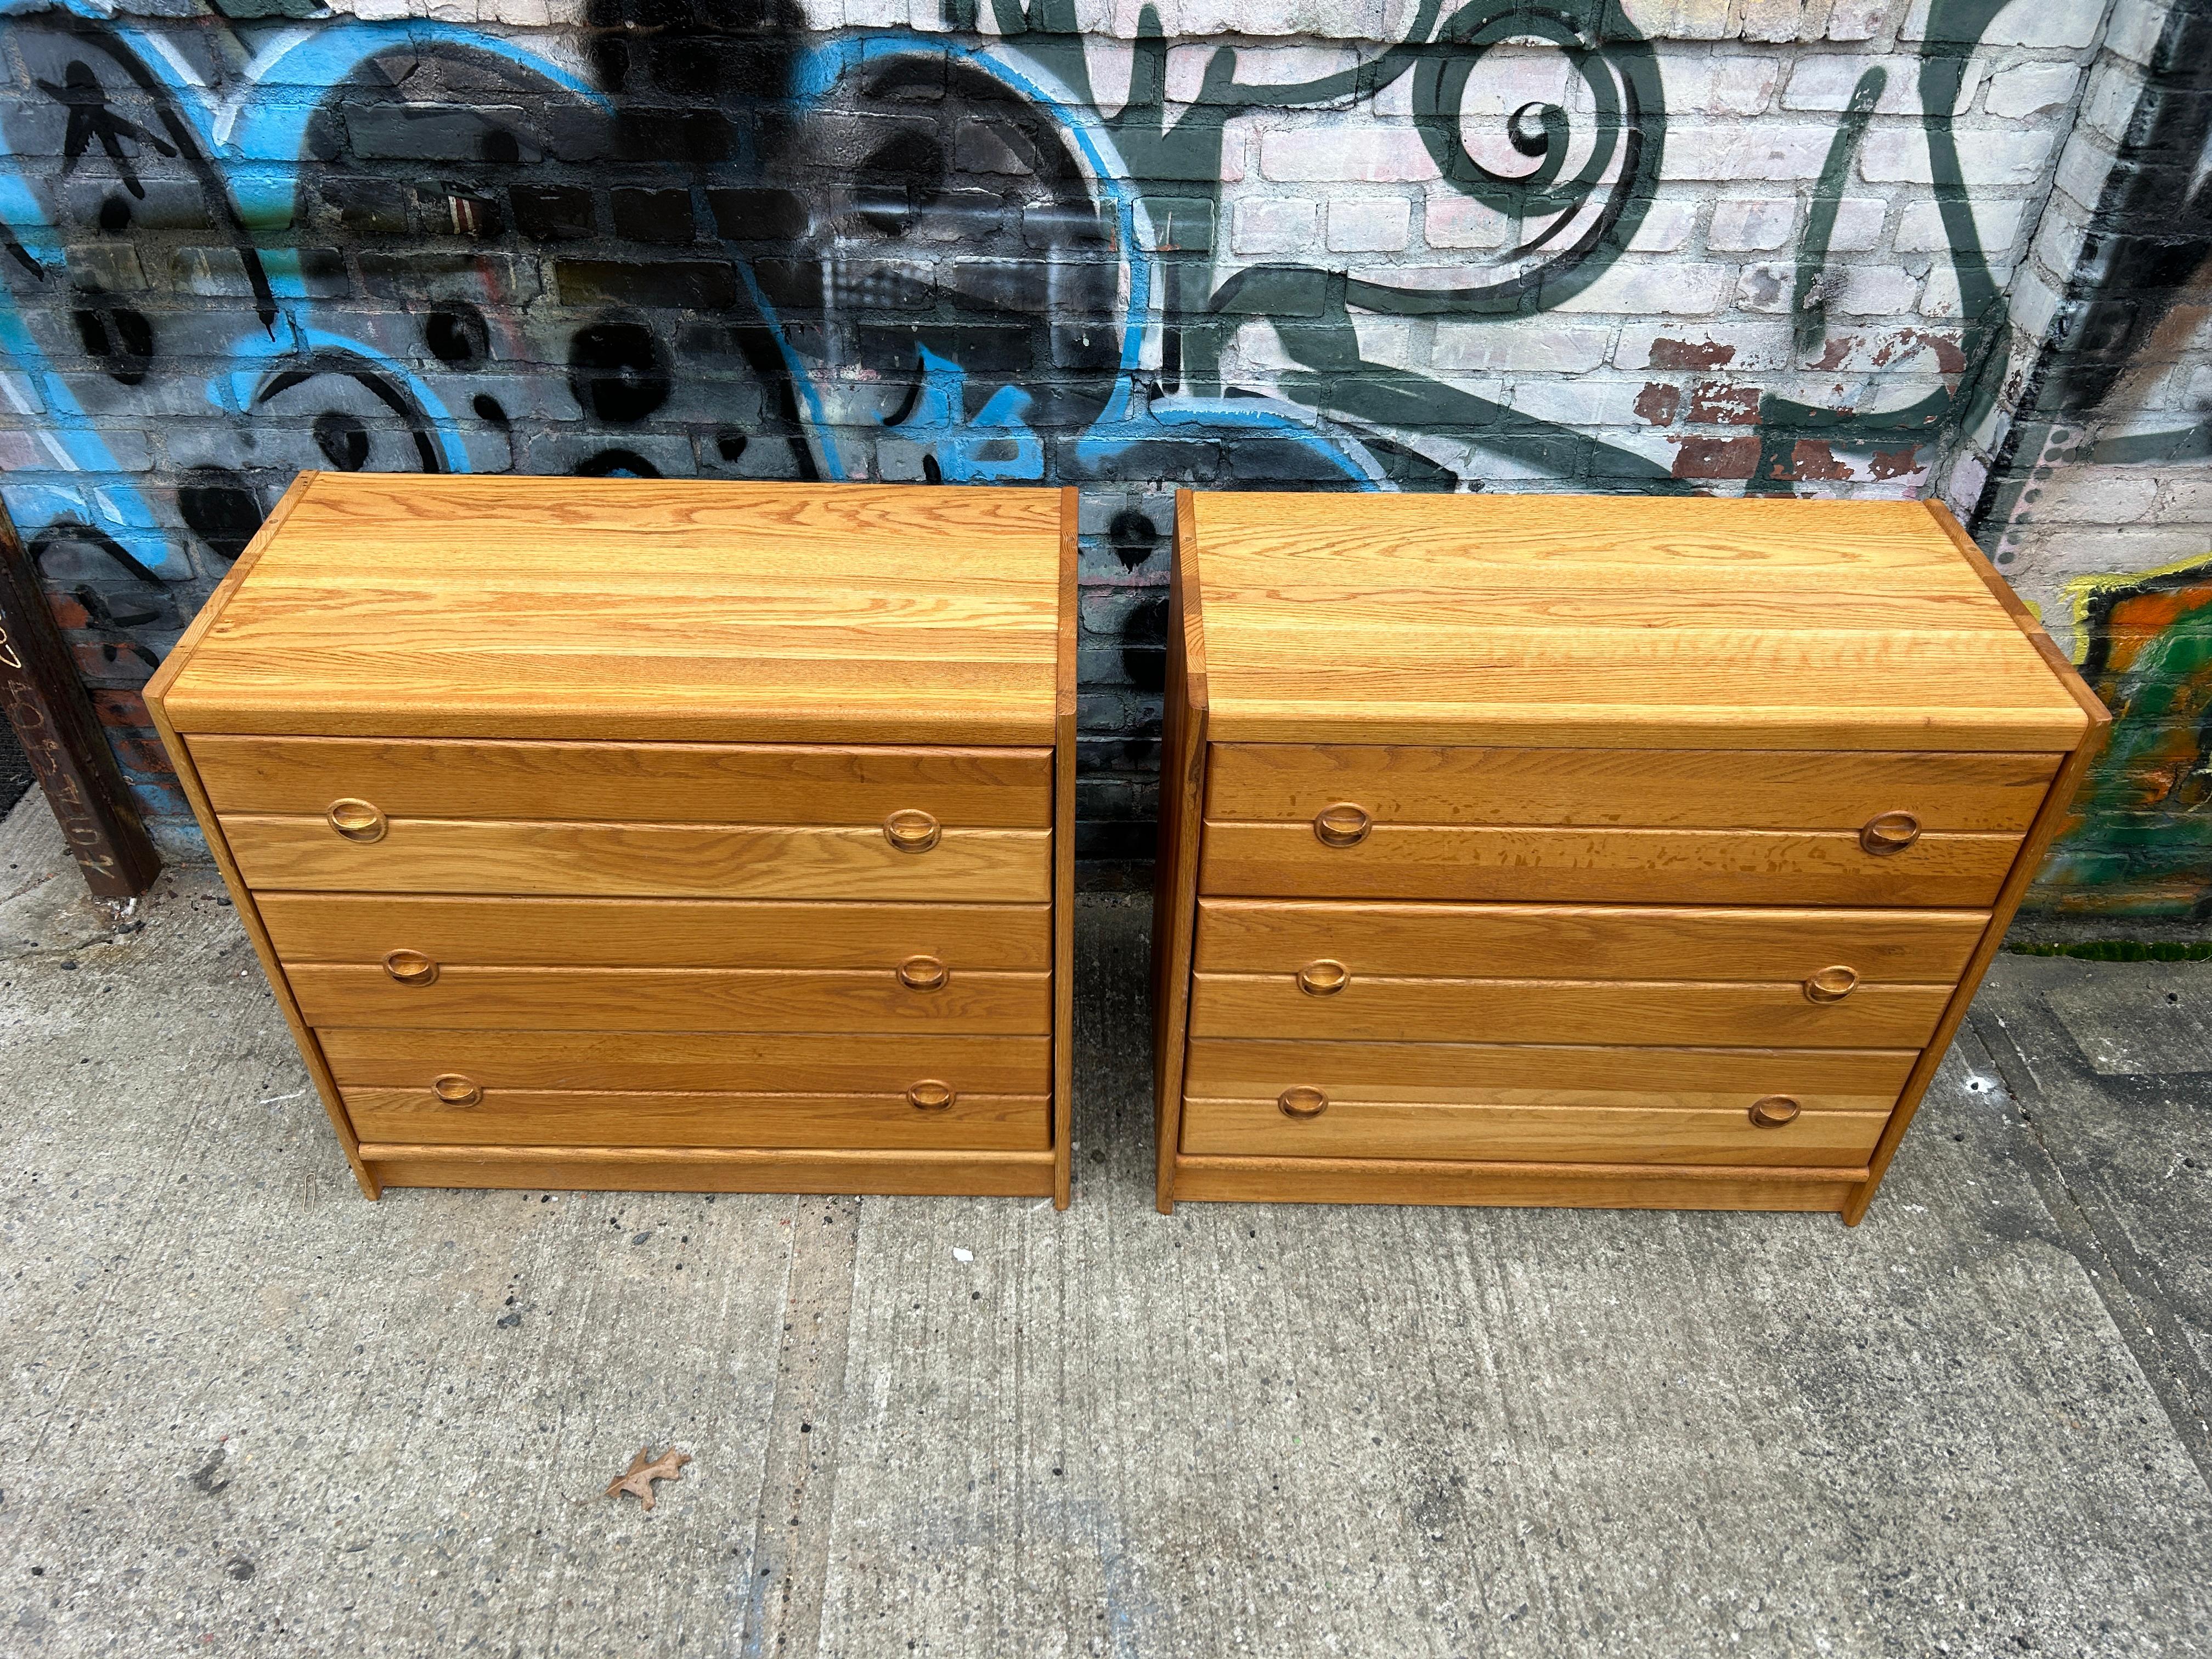 Beautiful pair of mid century Danish modern Solid Oak three-drawer dressers. Great simple design and great vintage condition - clean inside and out. Drawers slide smooth on metal glides. Great light blonde oak wood grain with solid oak round carved